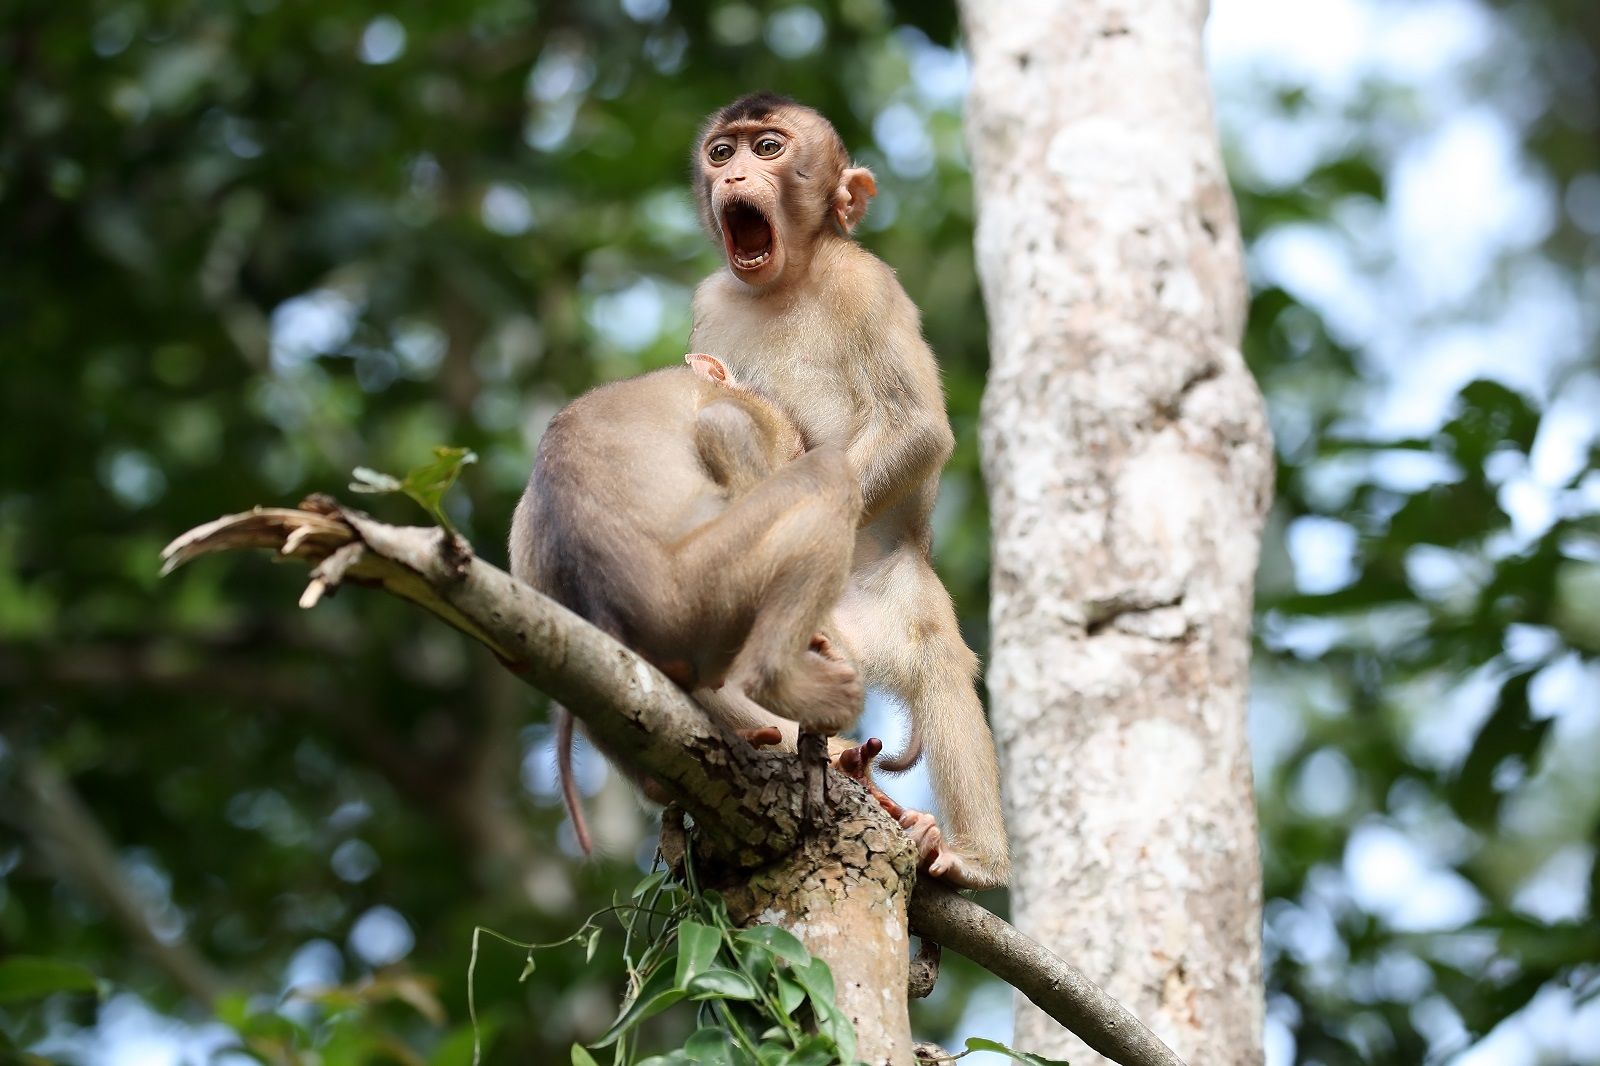 Enjoy a good giggle with the Comedy Wildlife Photography awards photo 27